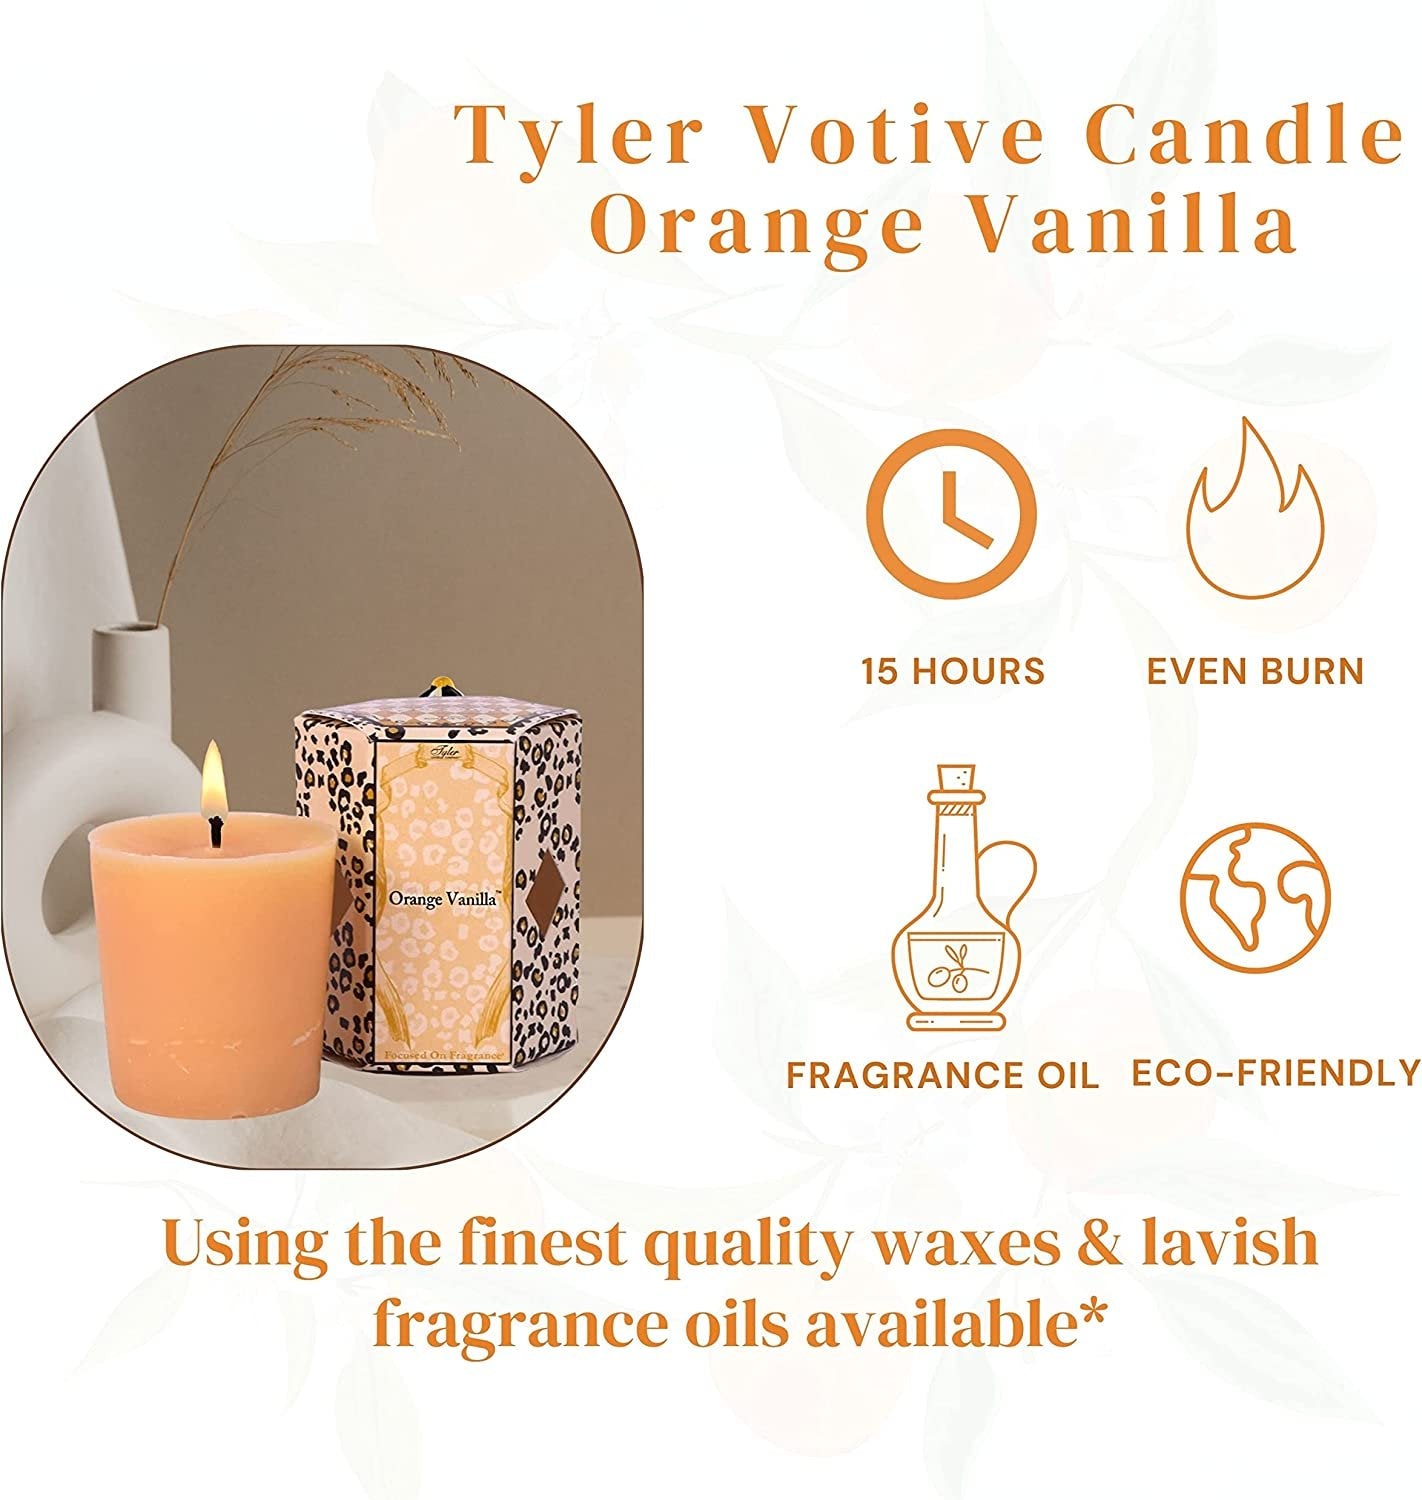 Tyler Candle Company Orange Vanilla Votive Candles - Luxury Scented Candle with Essential Oils - 16 Pack of 2 oz Small Candles with 15 Hour Burn Time Each - with Bonus Key Chain